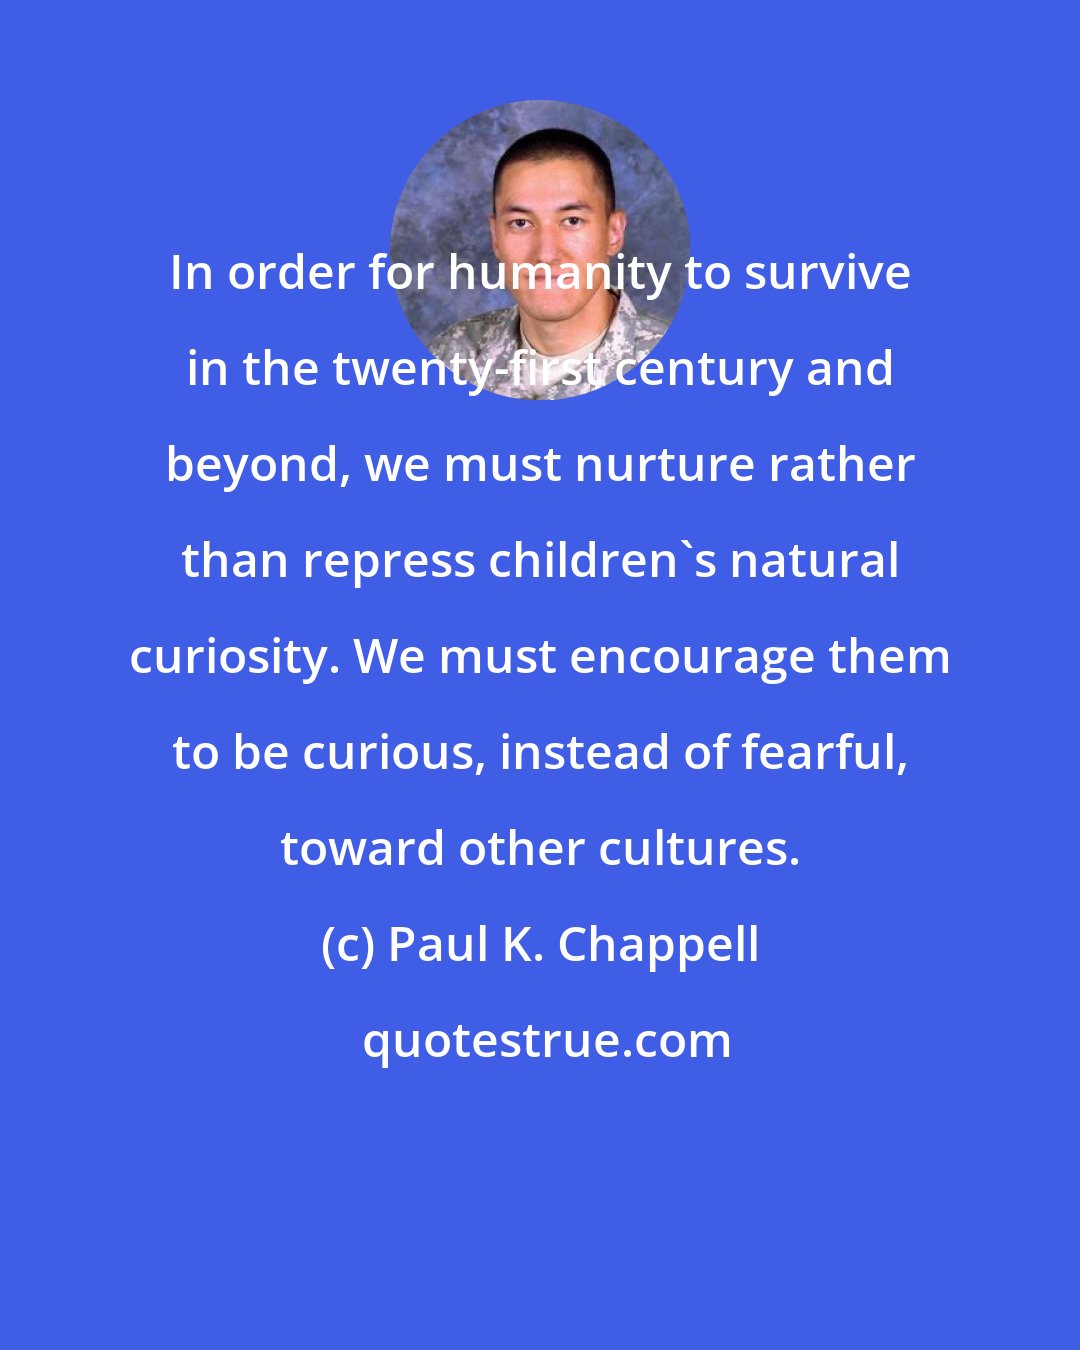 Paul K. Chappell: In order for humanity to survive in the twenty-first century and beyond, we must nurture rather than repress children's natural curiosity. We must encourage them to be curious, instead of fearful, toward other cultures.